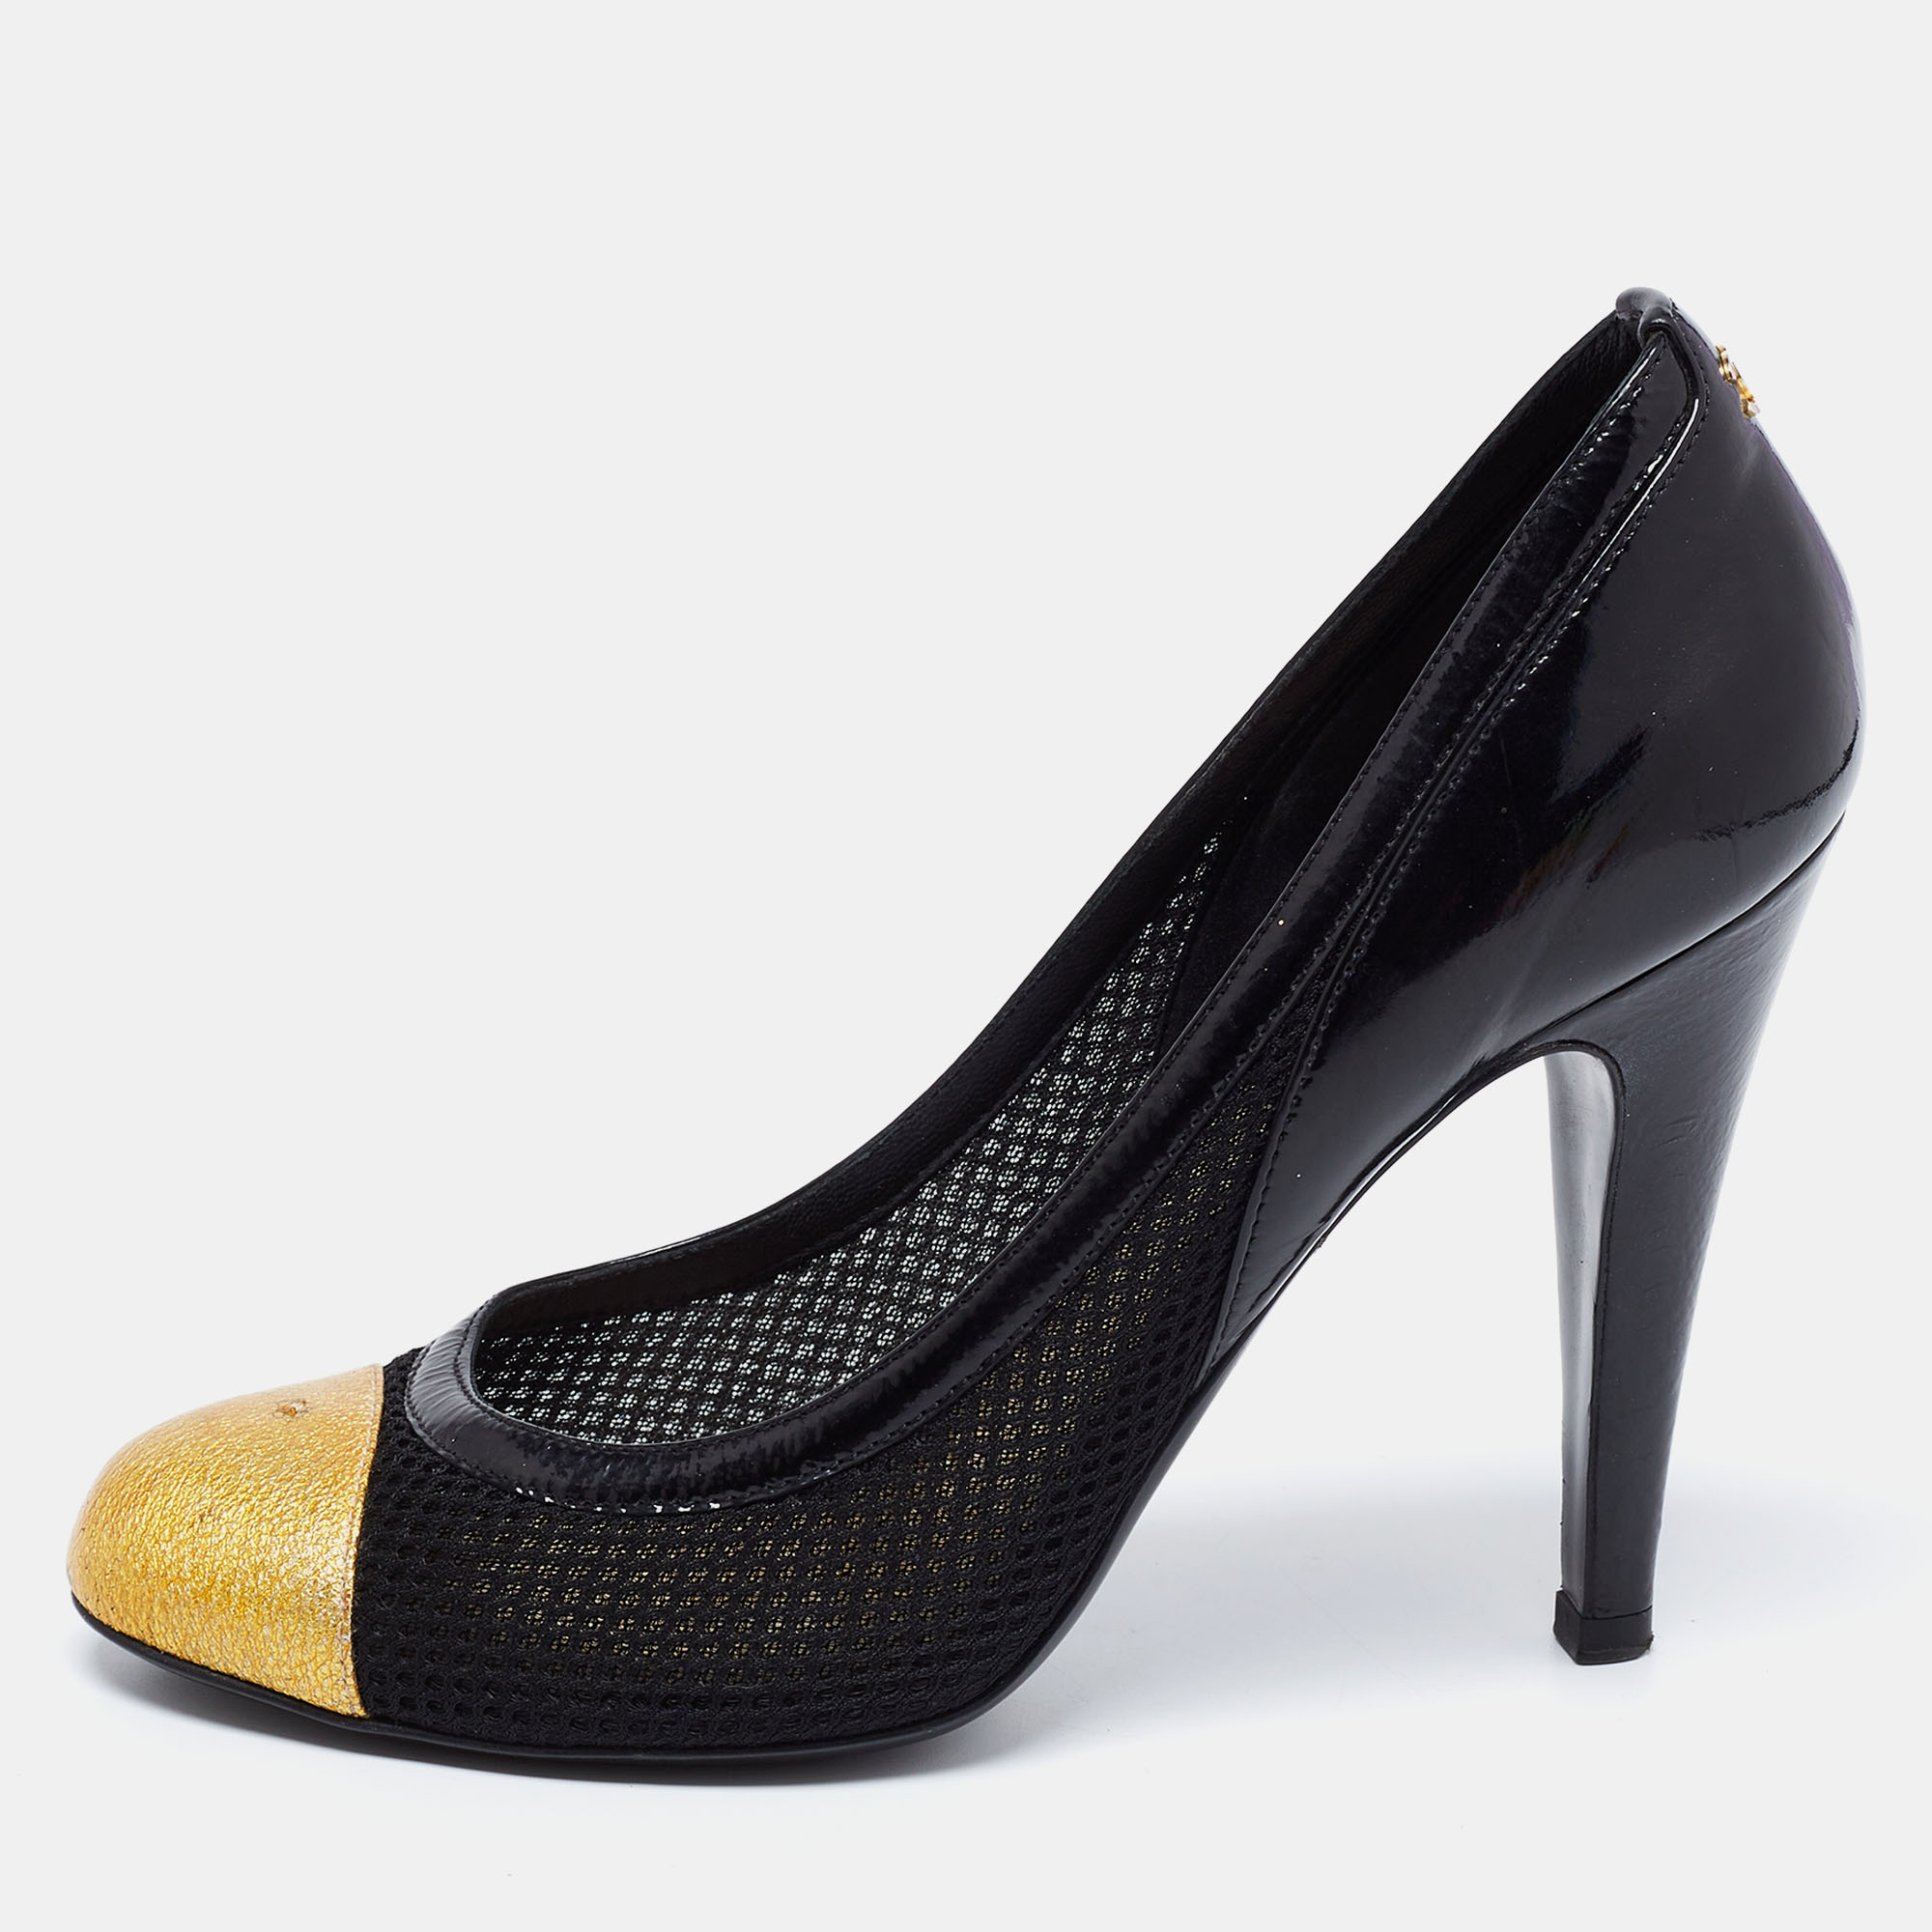 Chanel black/yellow mesh, patent and textured leather cap-toe pumps size 39